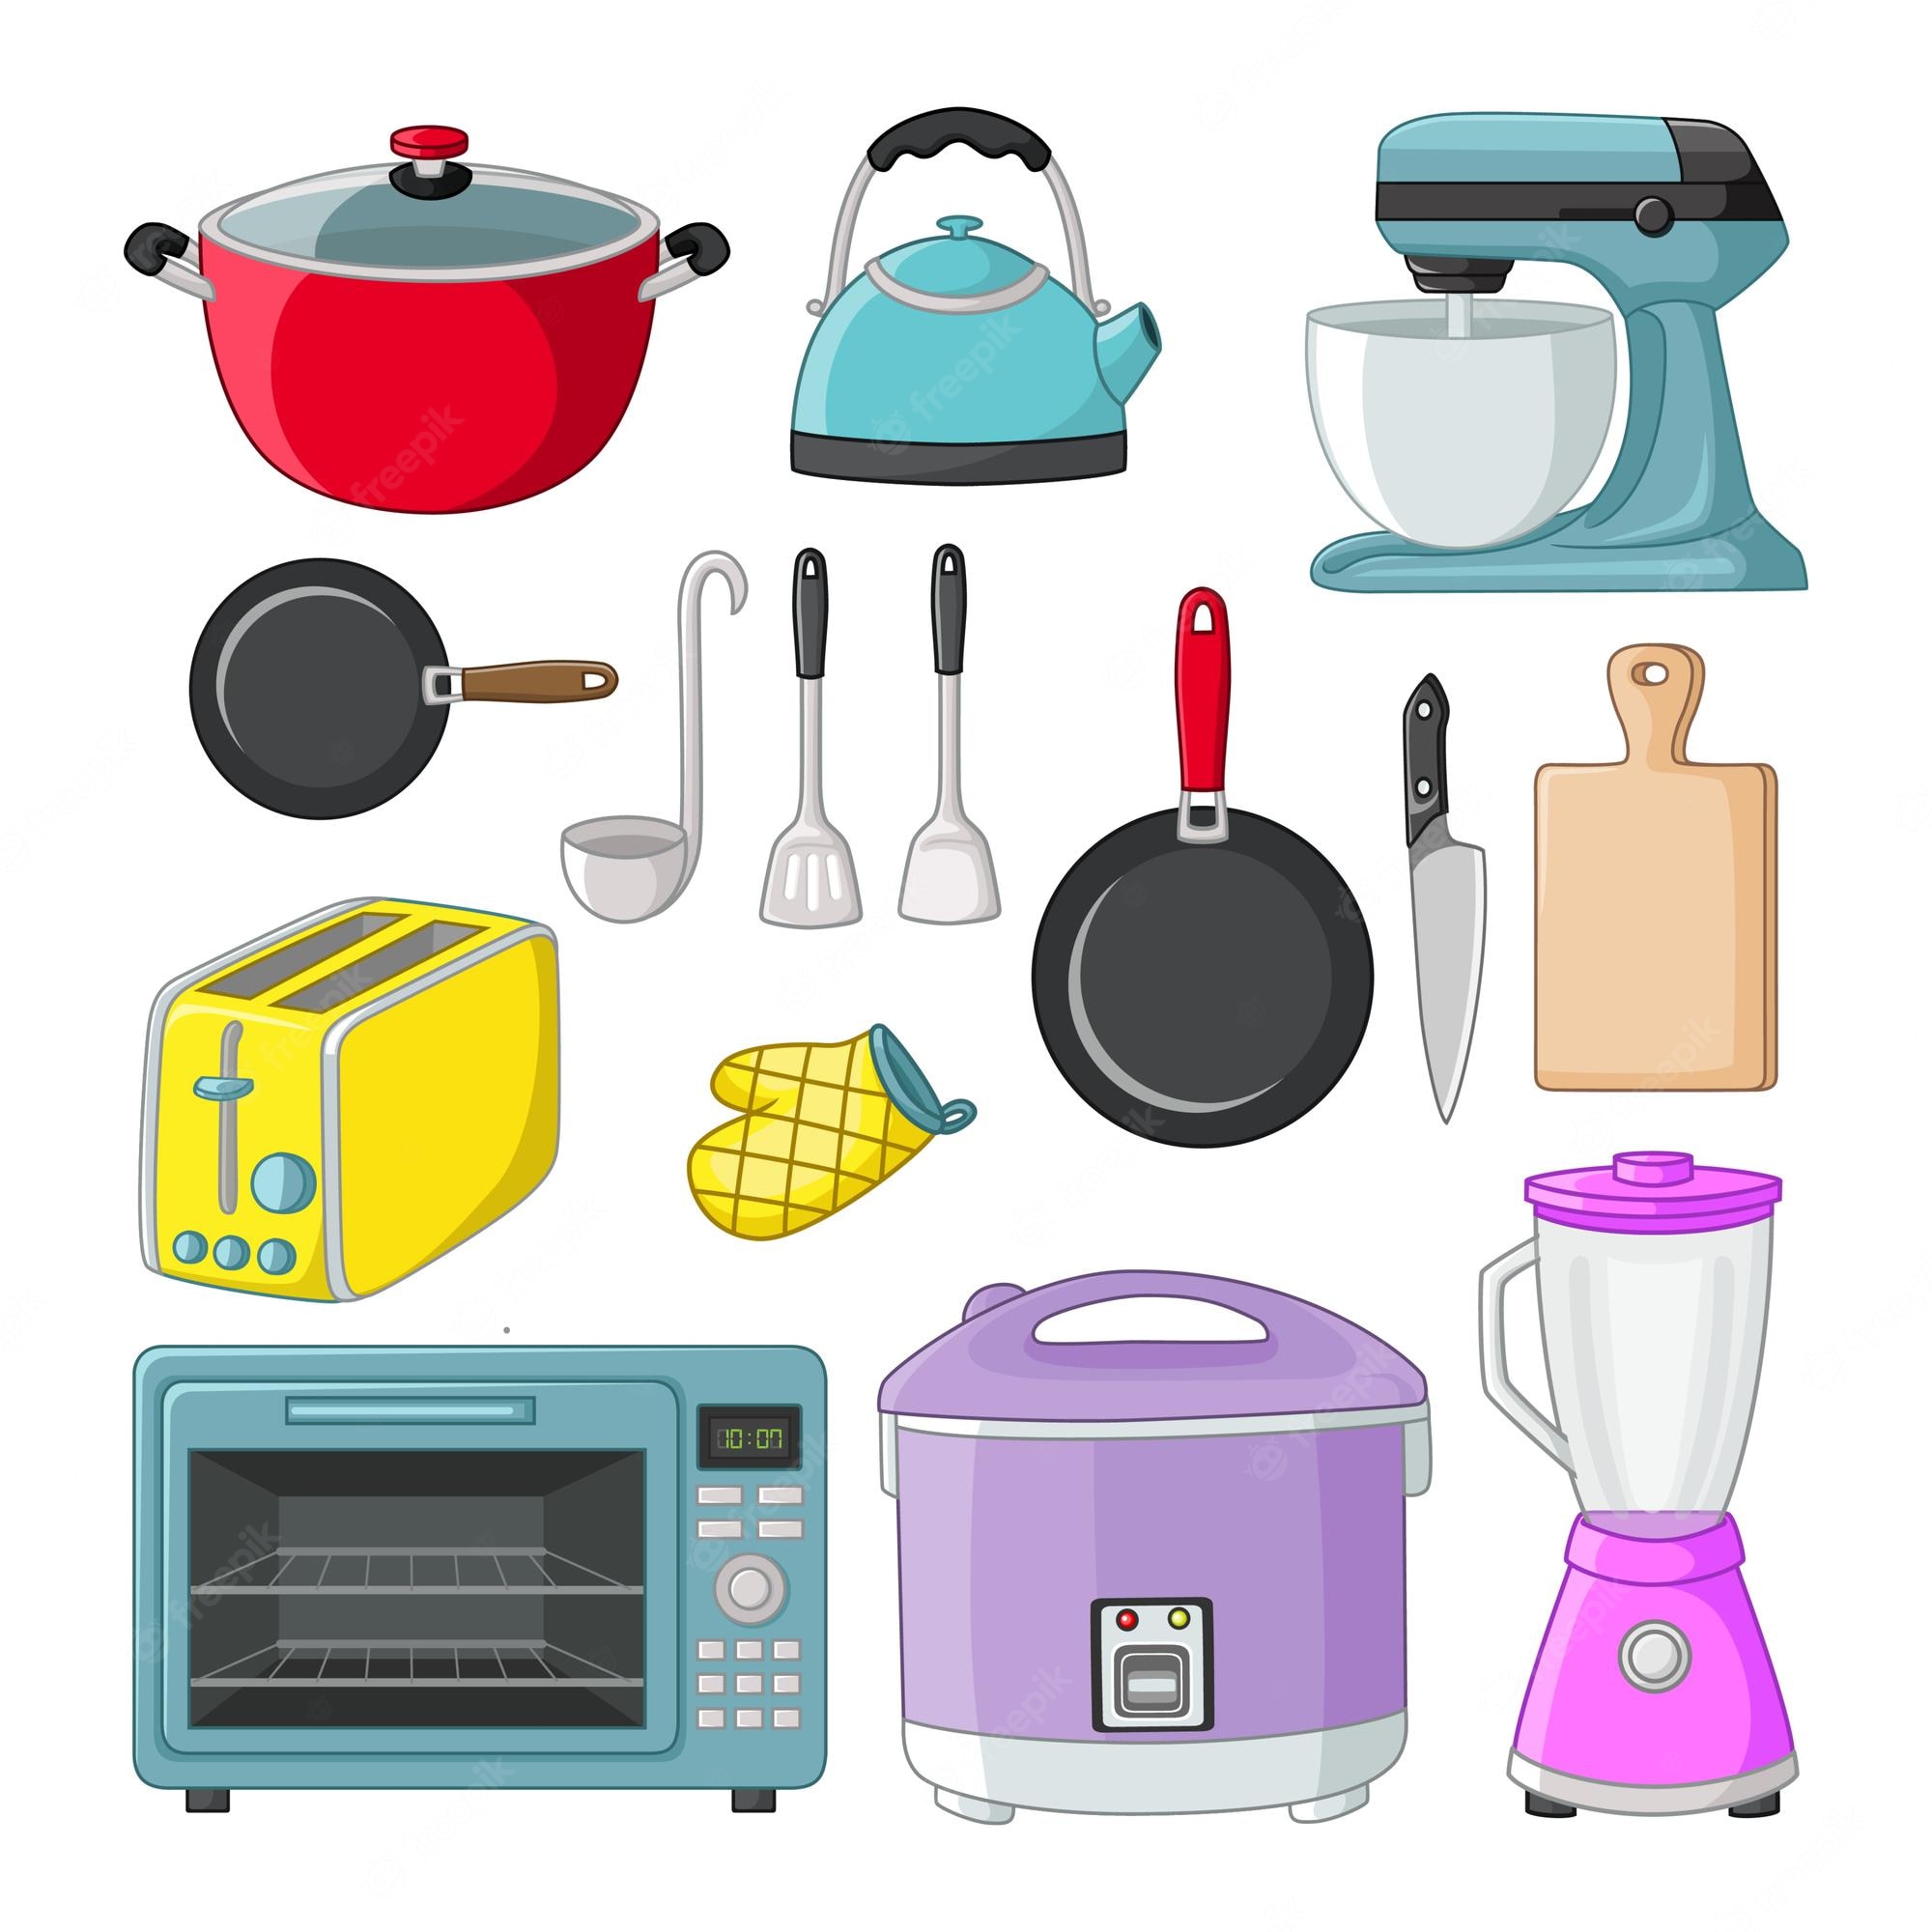 electrical appliances in the kitchen clipart